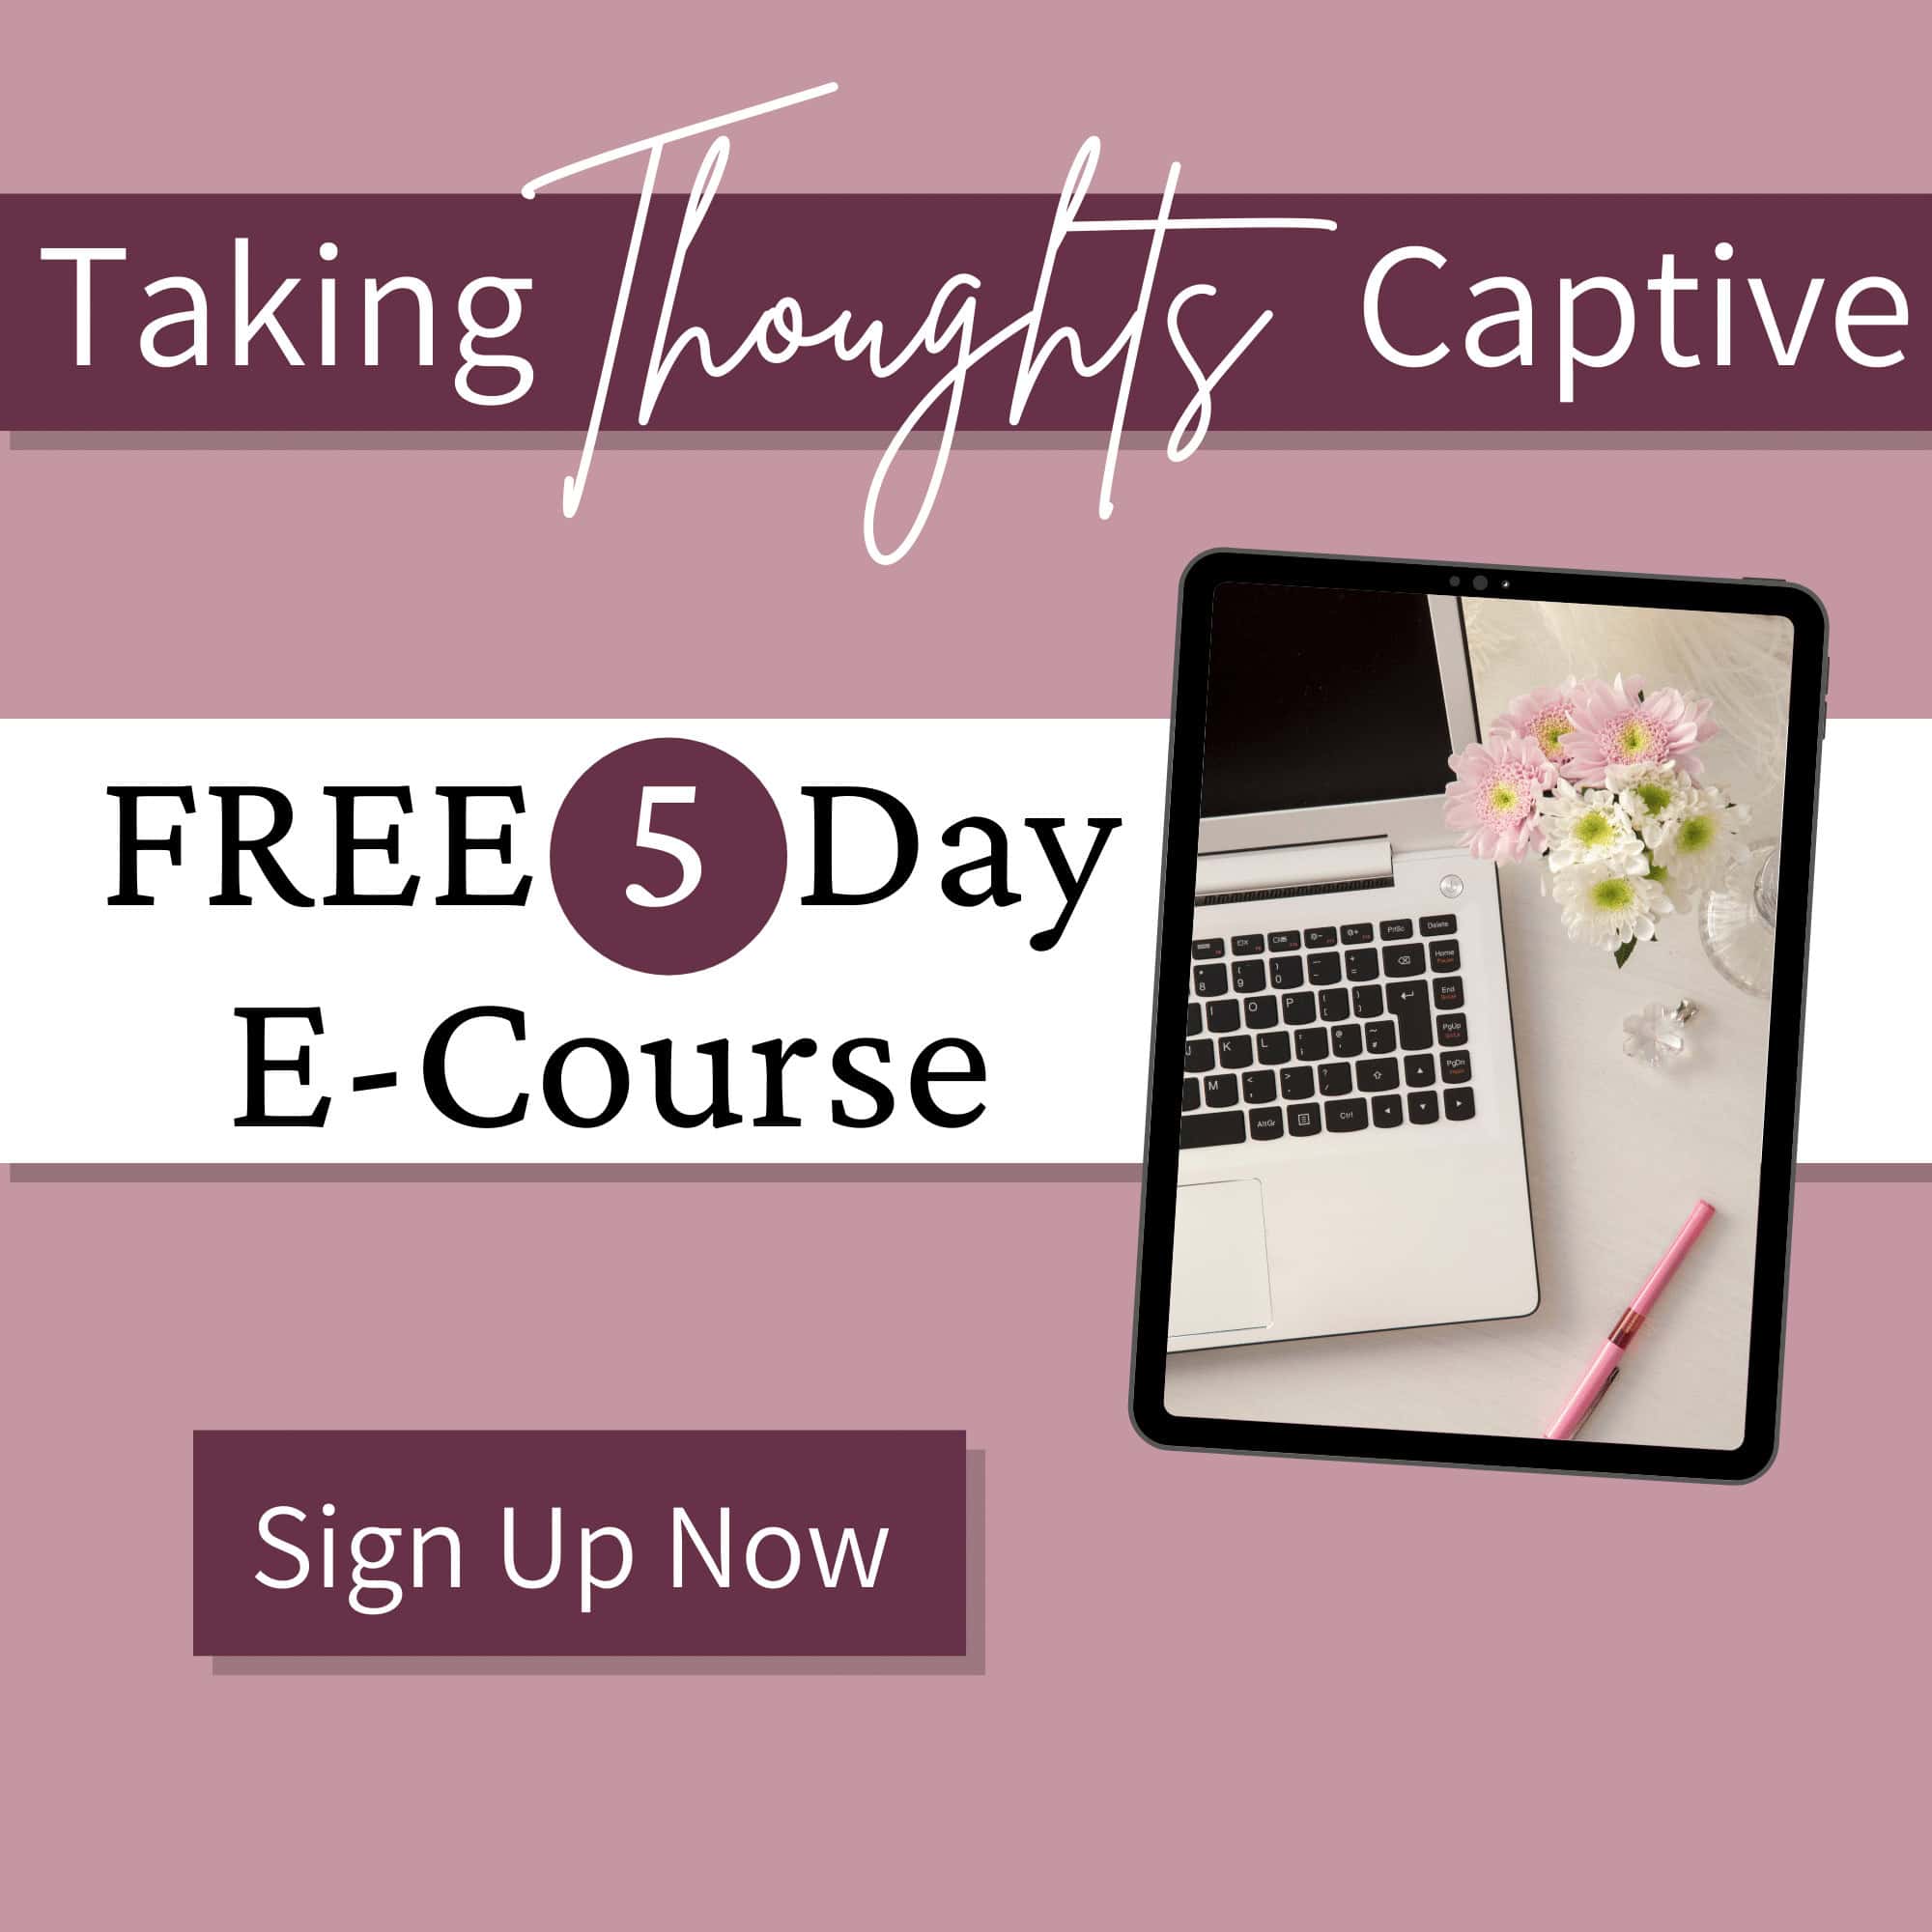 FREE E-COURSE: Taking Thoughts Captive